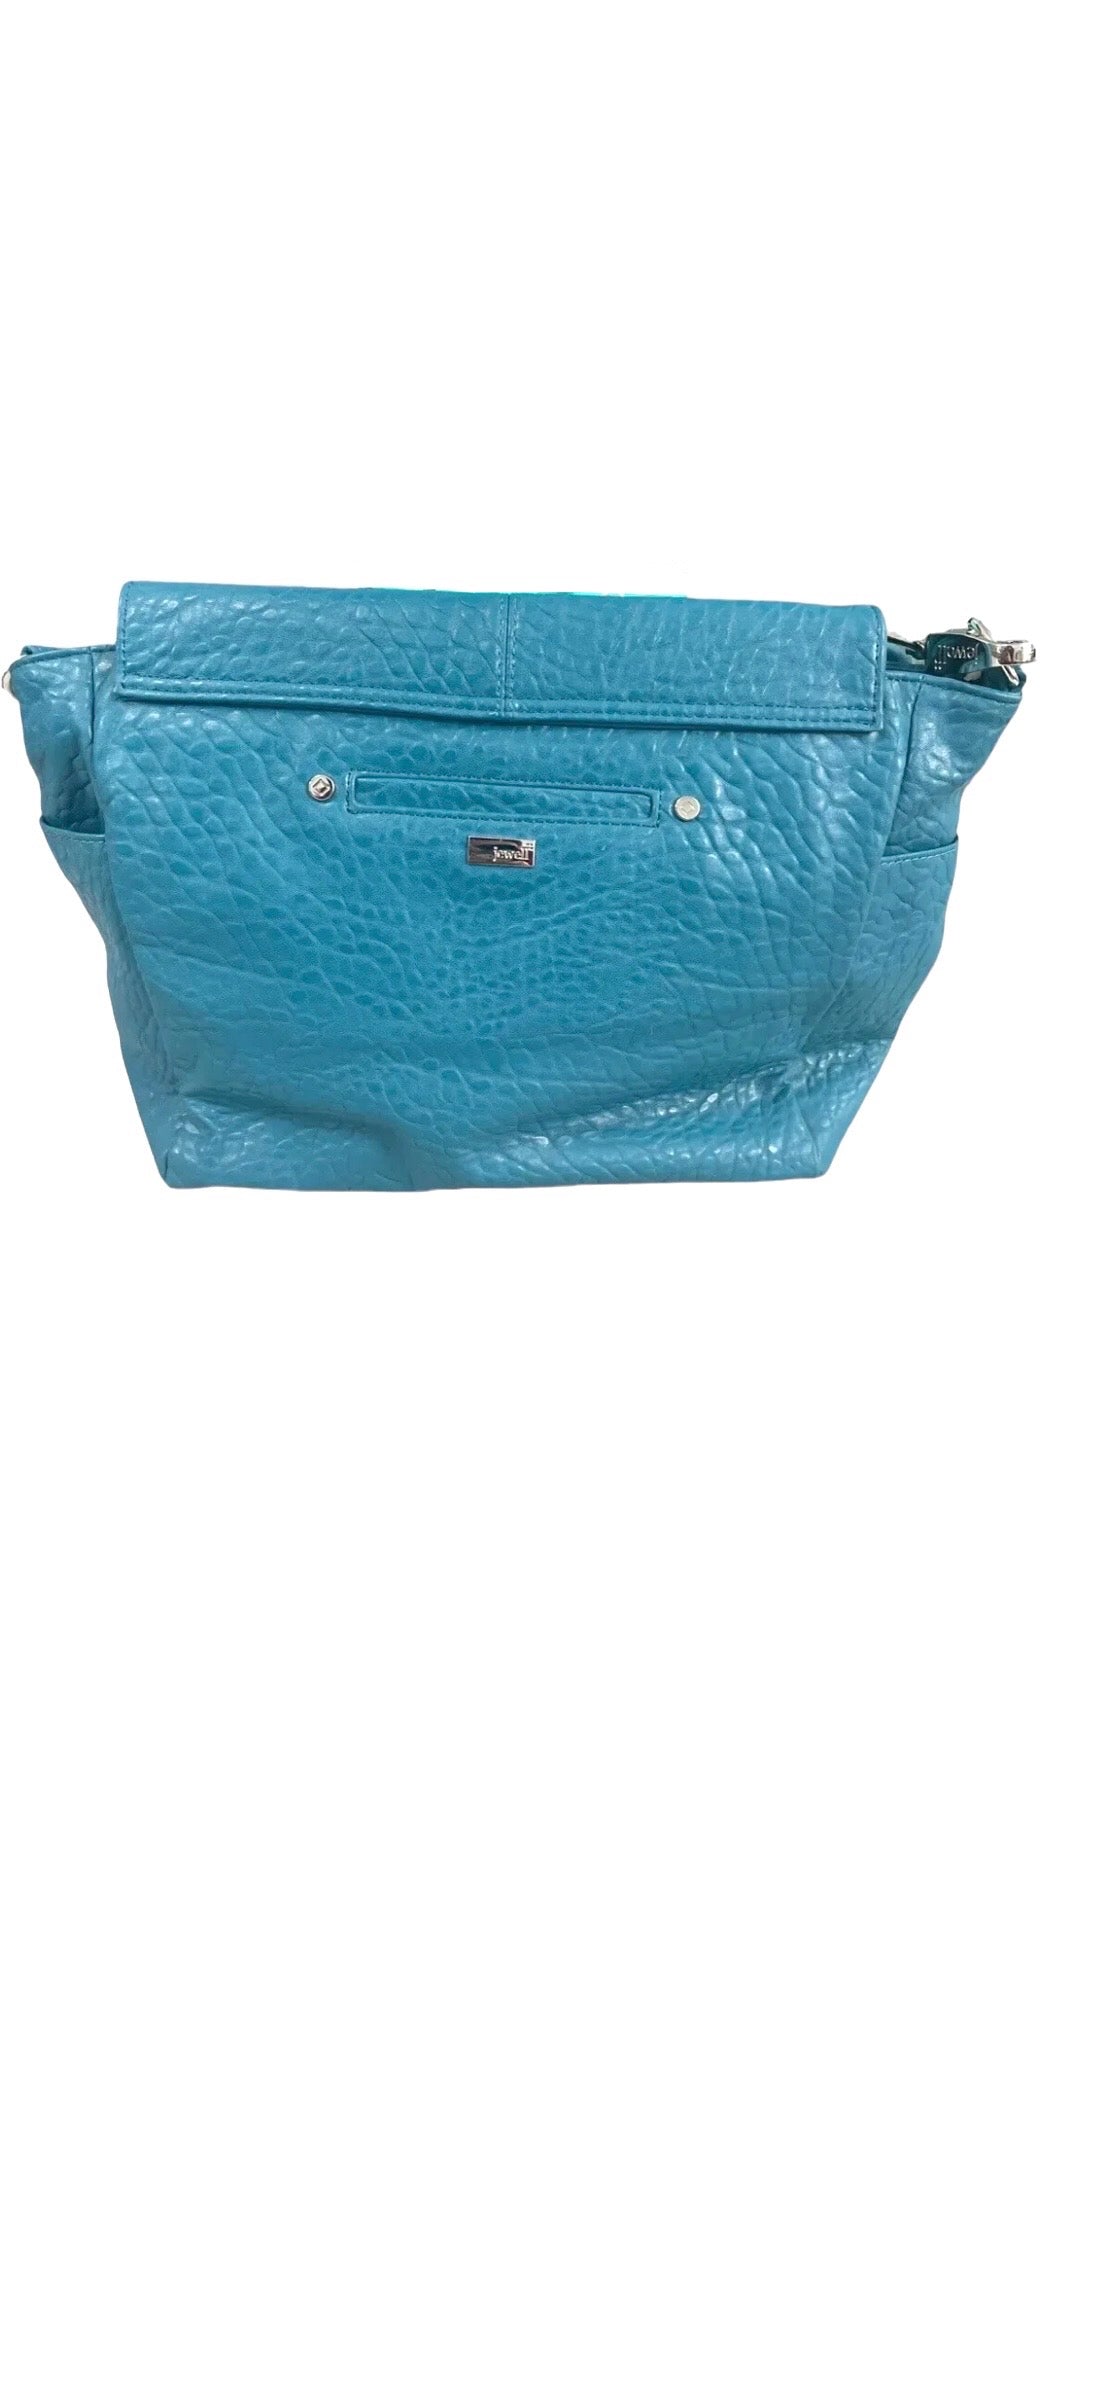 Thirty One Purse, Teal